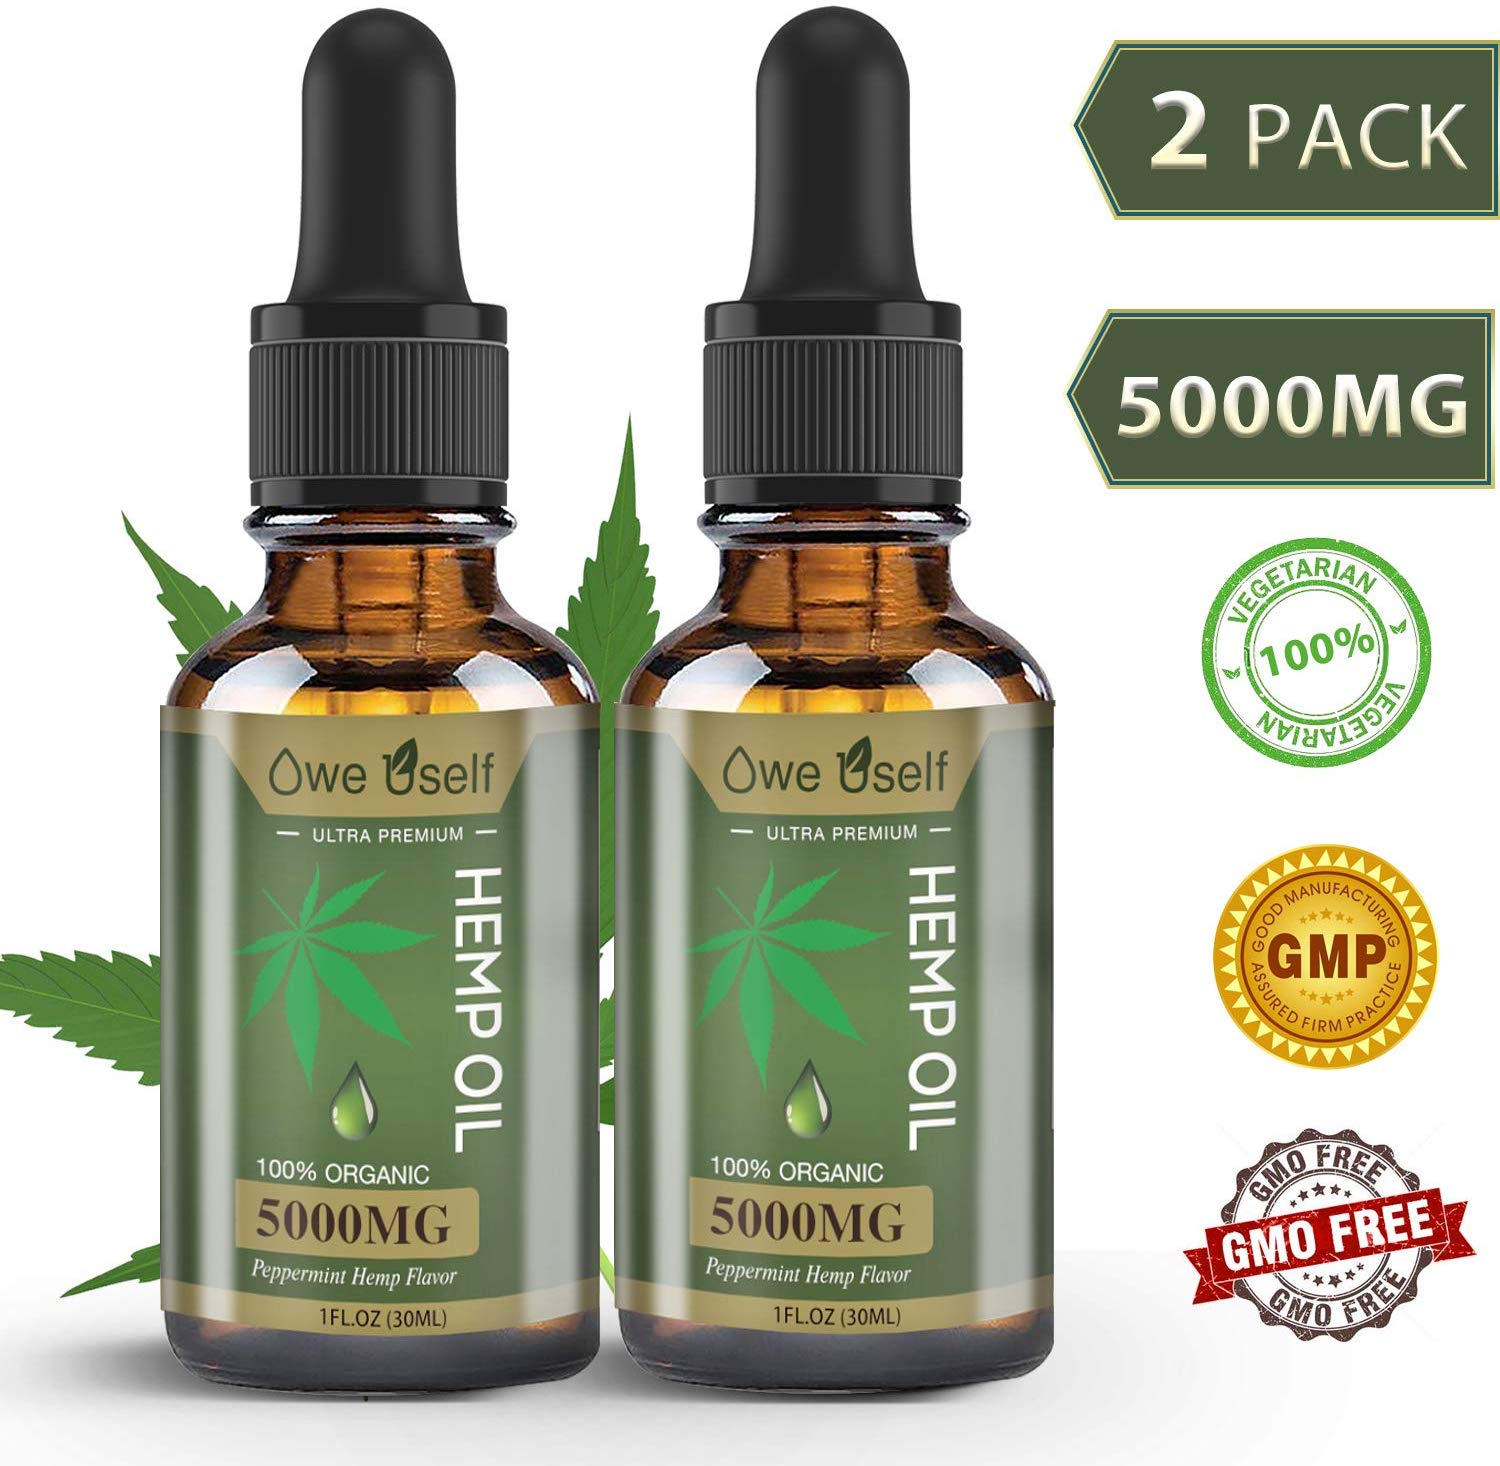 rebatee-hemp-oil-5000mg-extract-for-pain-required-color-option